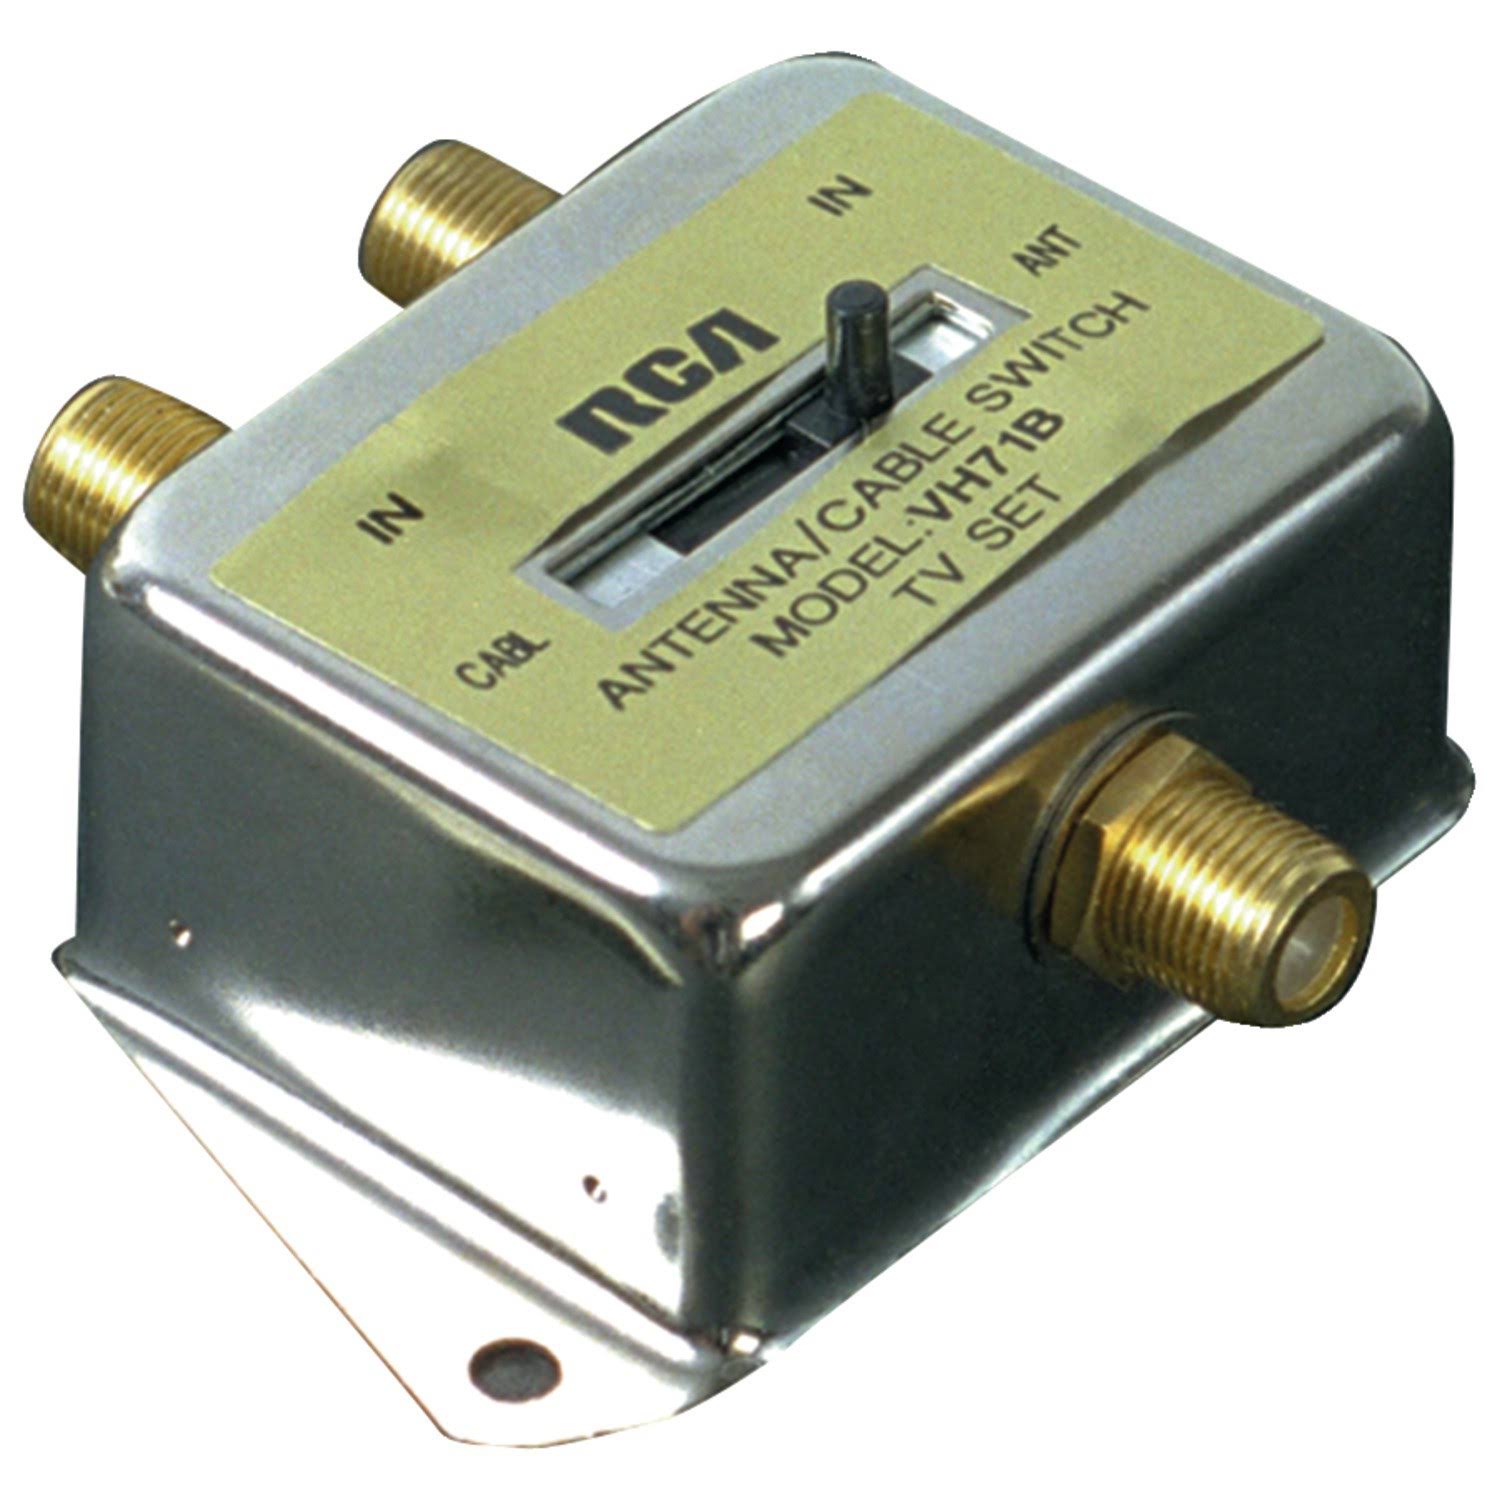 RCA 2 Way A/B Coaxial Cable Switch